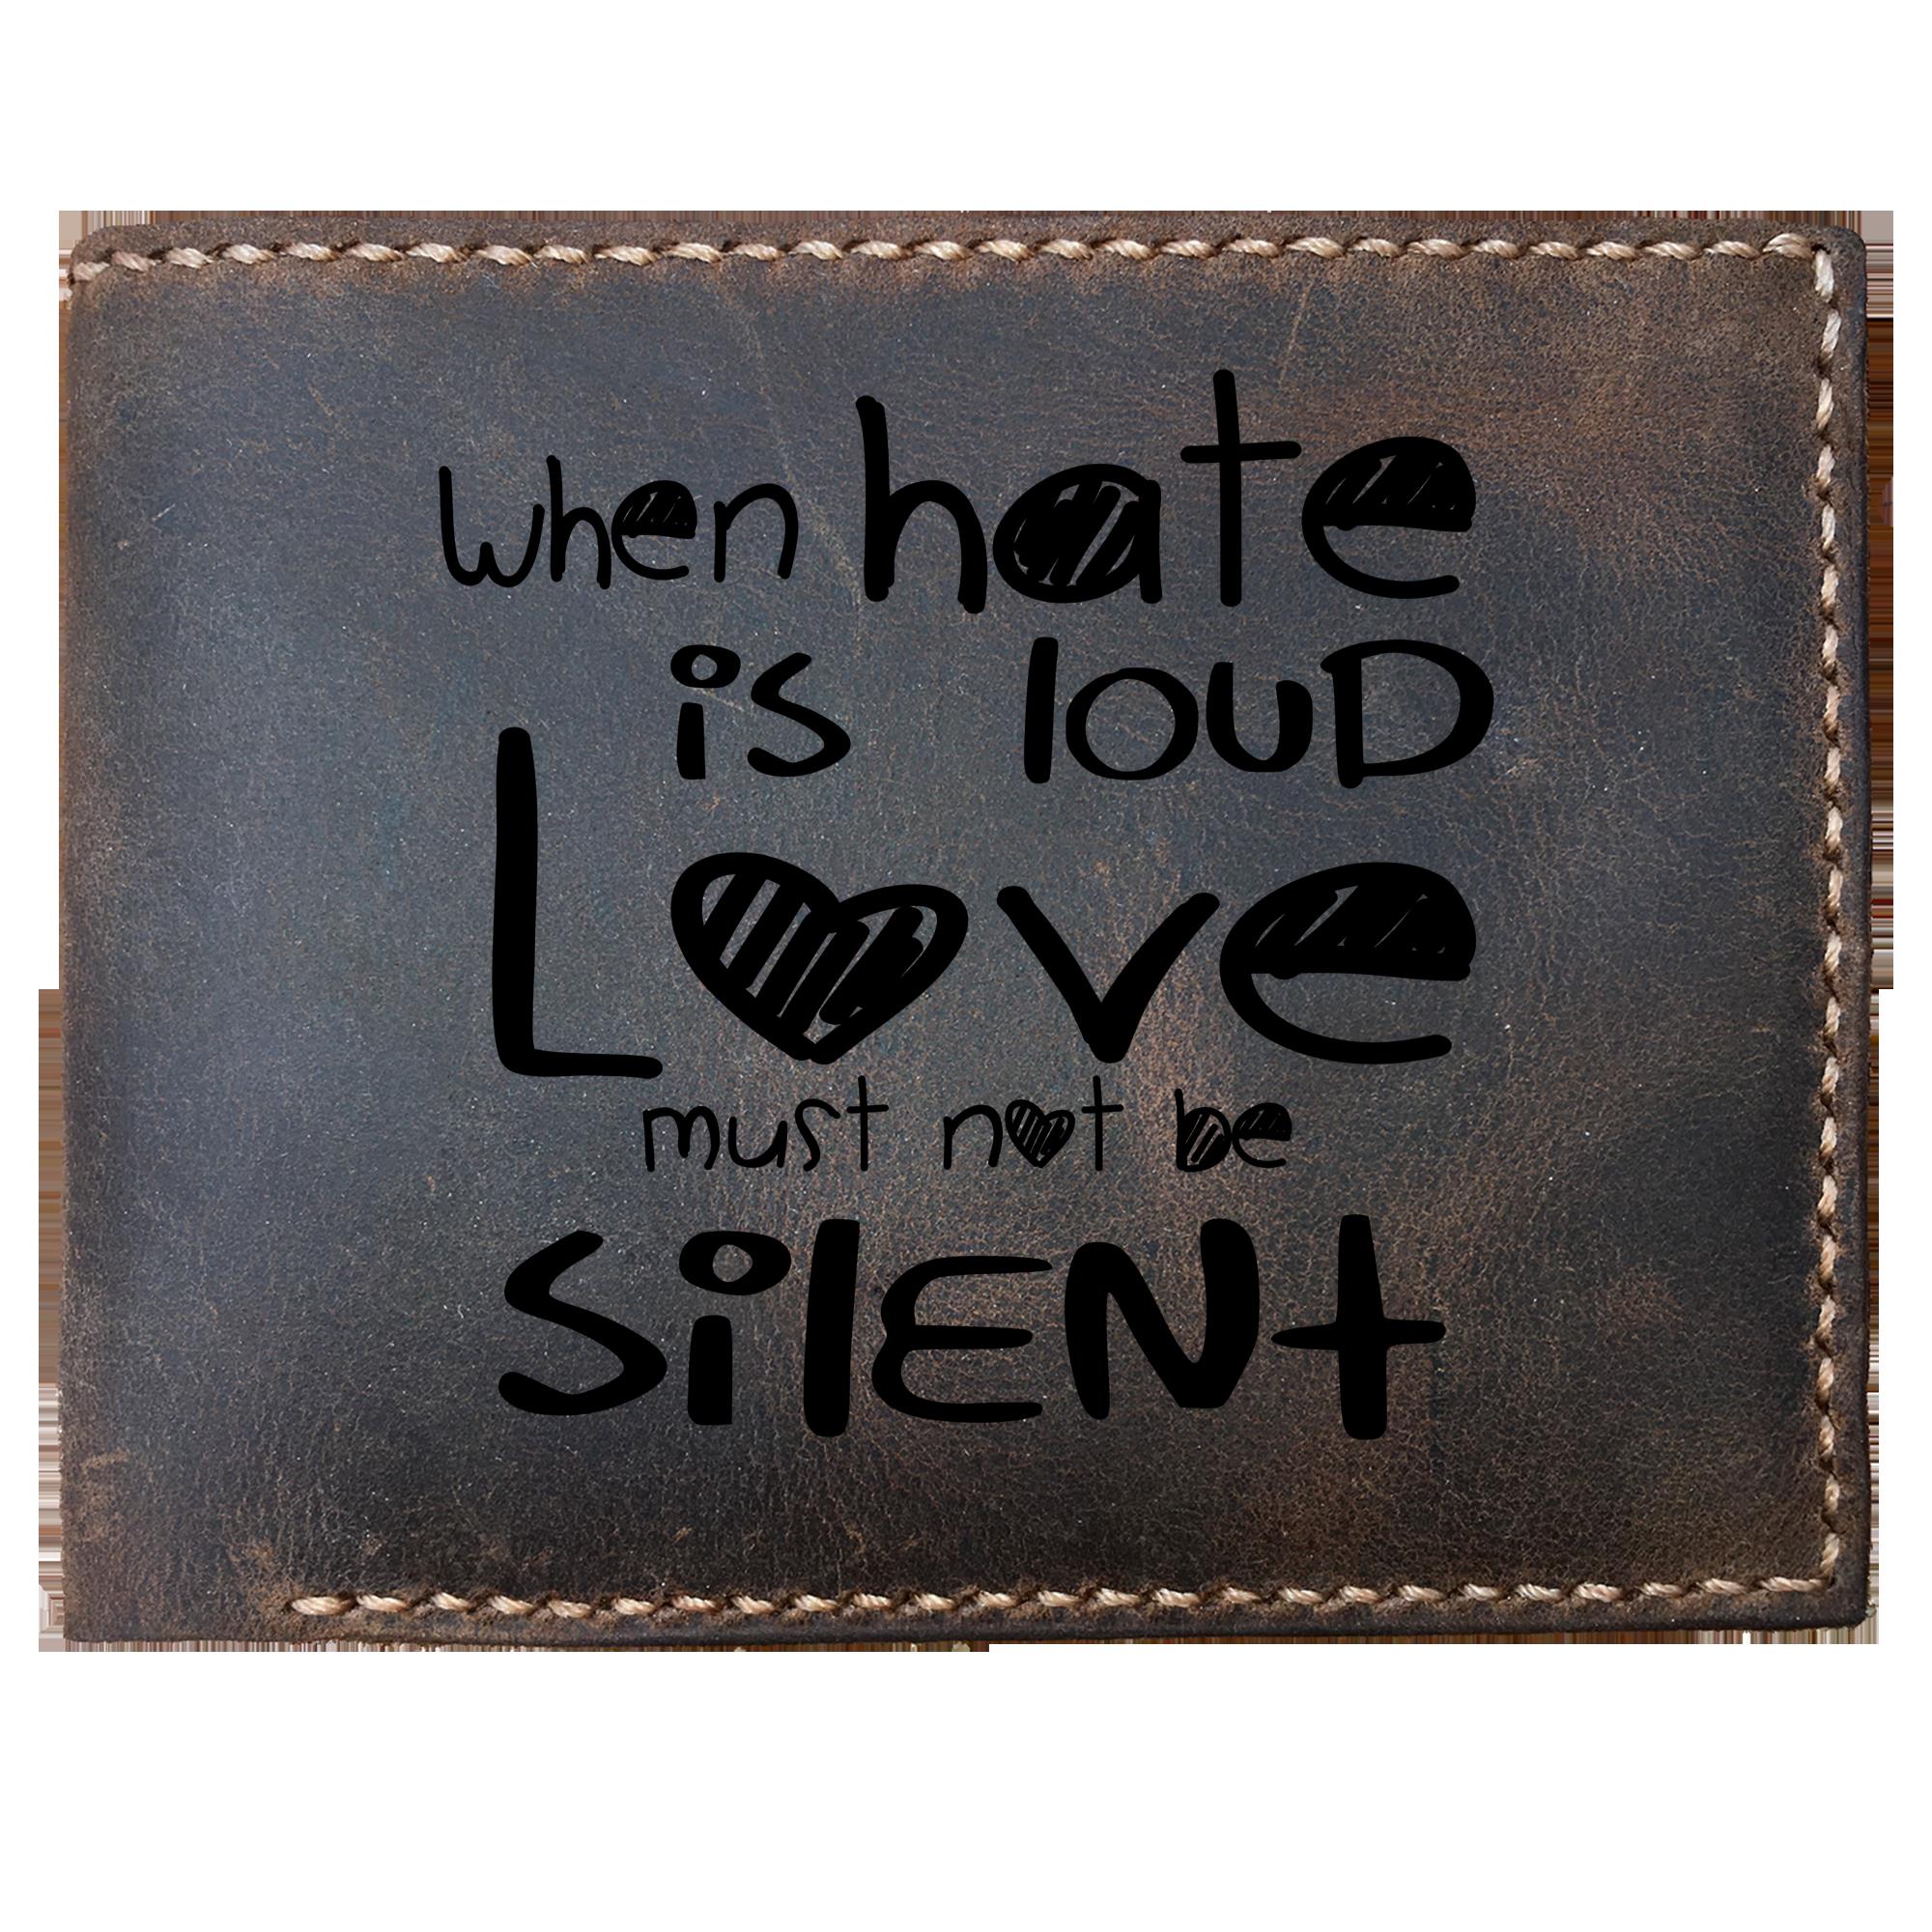 Skitongifts Funny Custom Laser Engraved Bifold Leather Wallet For Men, When Hate Is Loud Love Must Not Be Silent